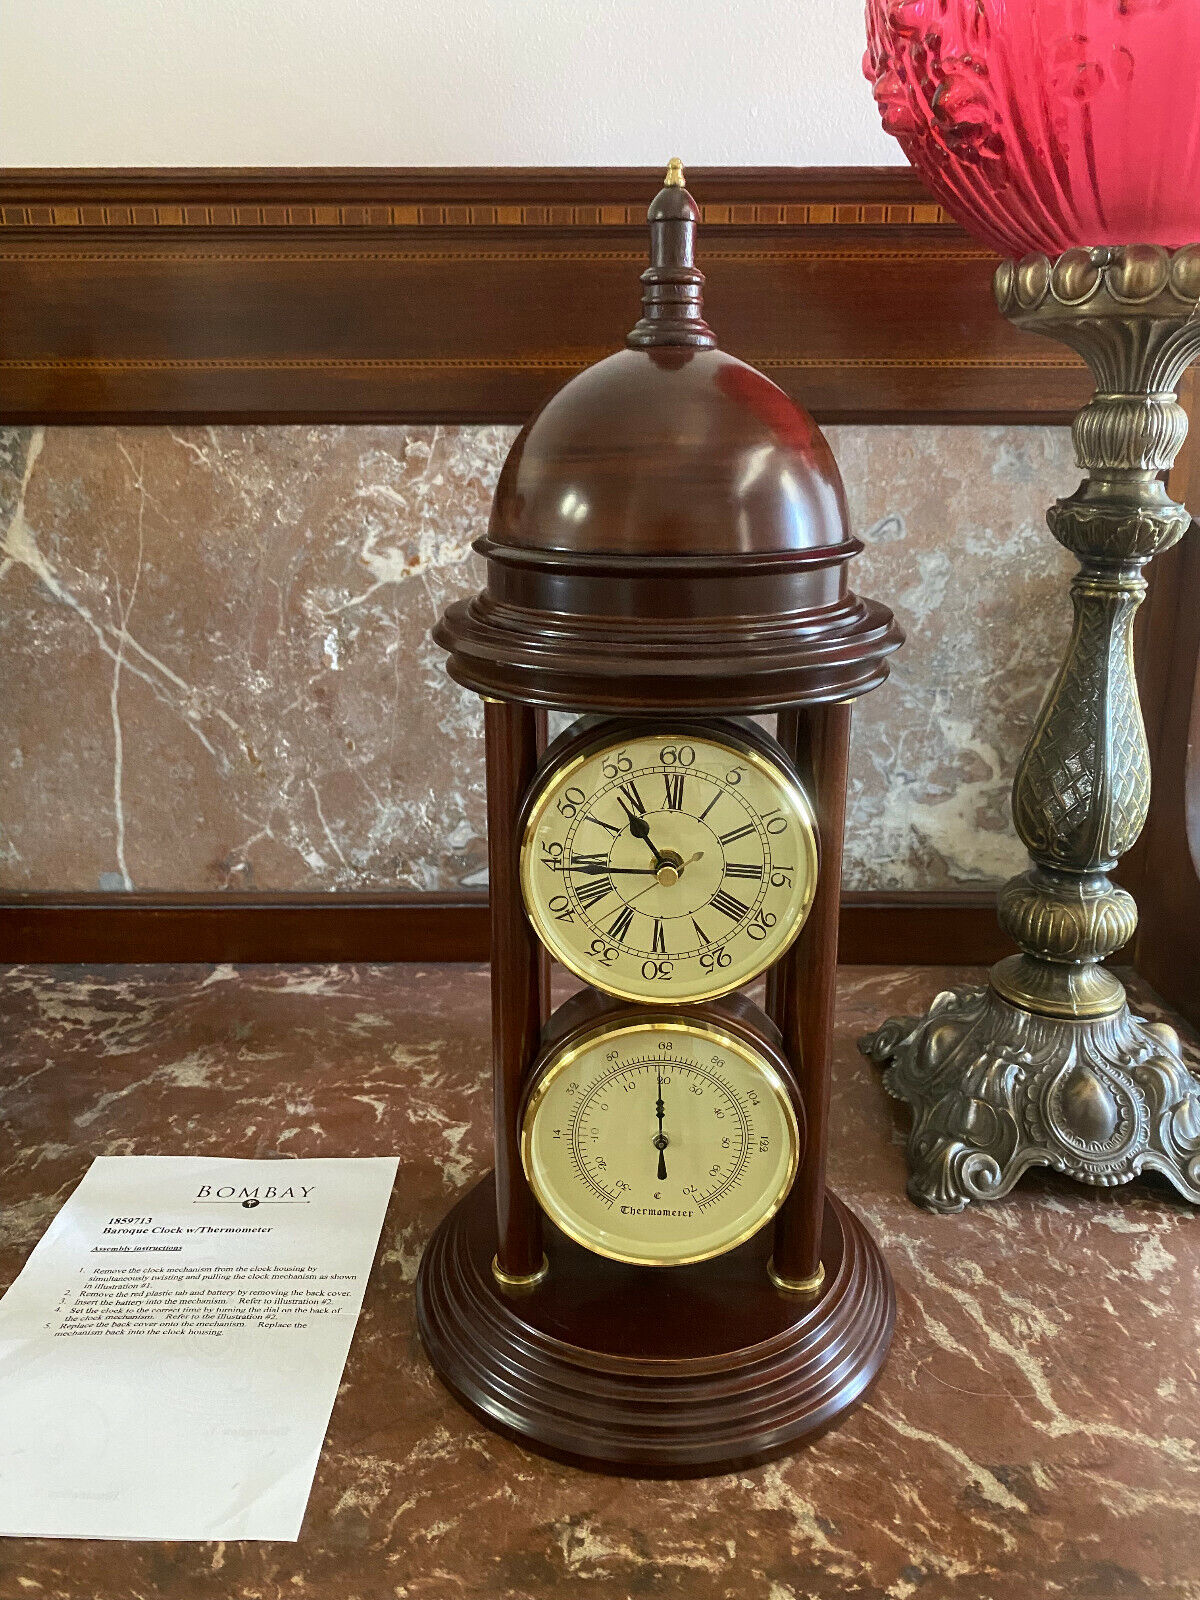 Bombay Baroque Clock & Thermometer BEAUTIFUL Wood Dome - Tested